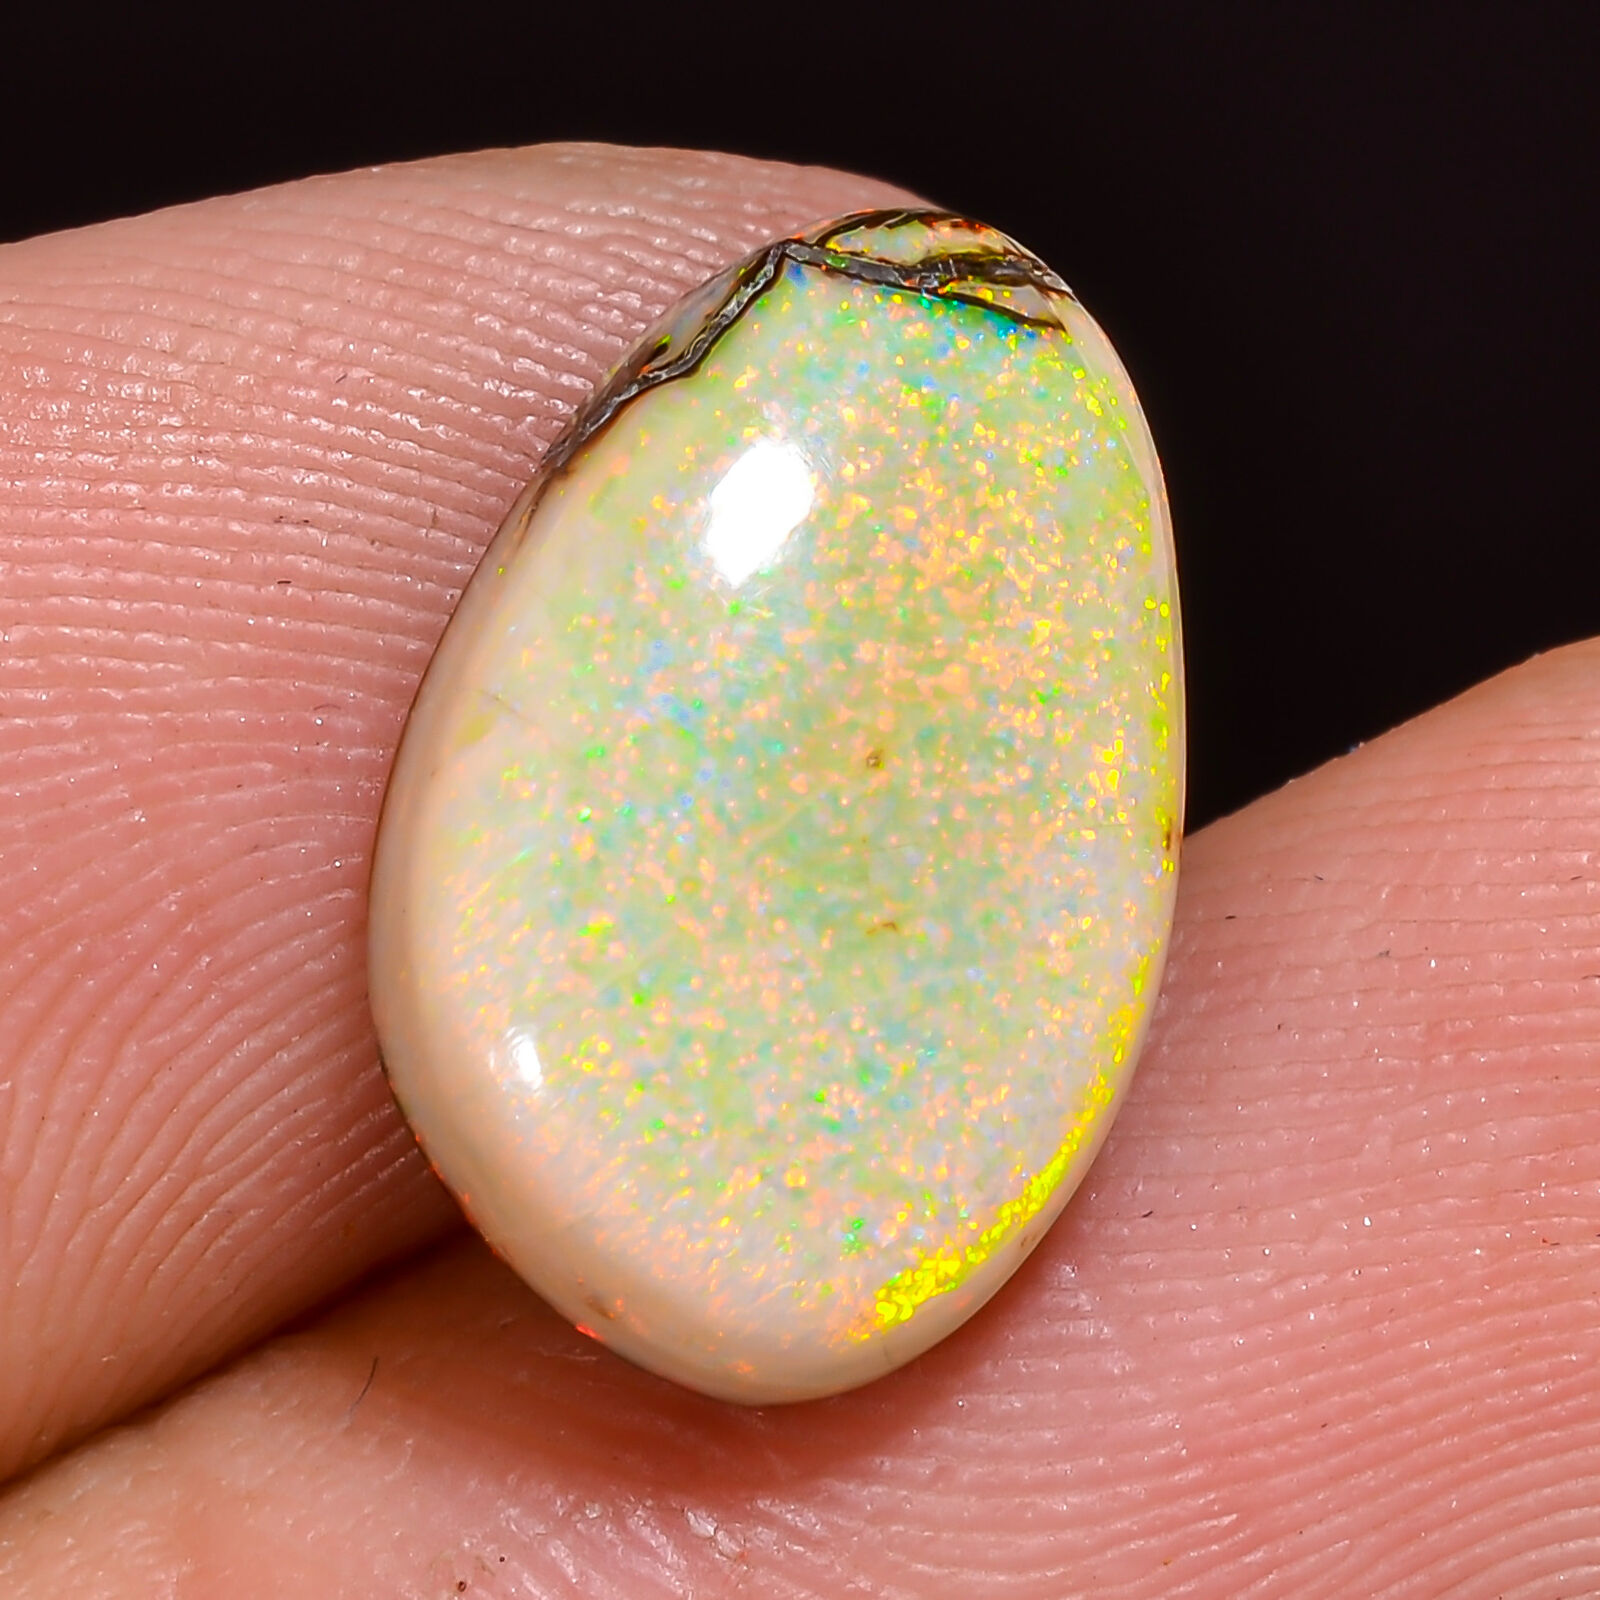 02.65Cts. Natural Multi Fire MONARCH/STERLING OPAL Fancy Cabochon Loose Gemstone